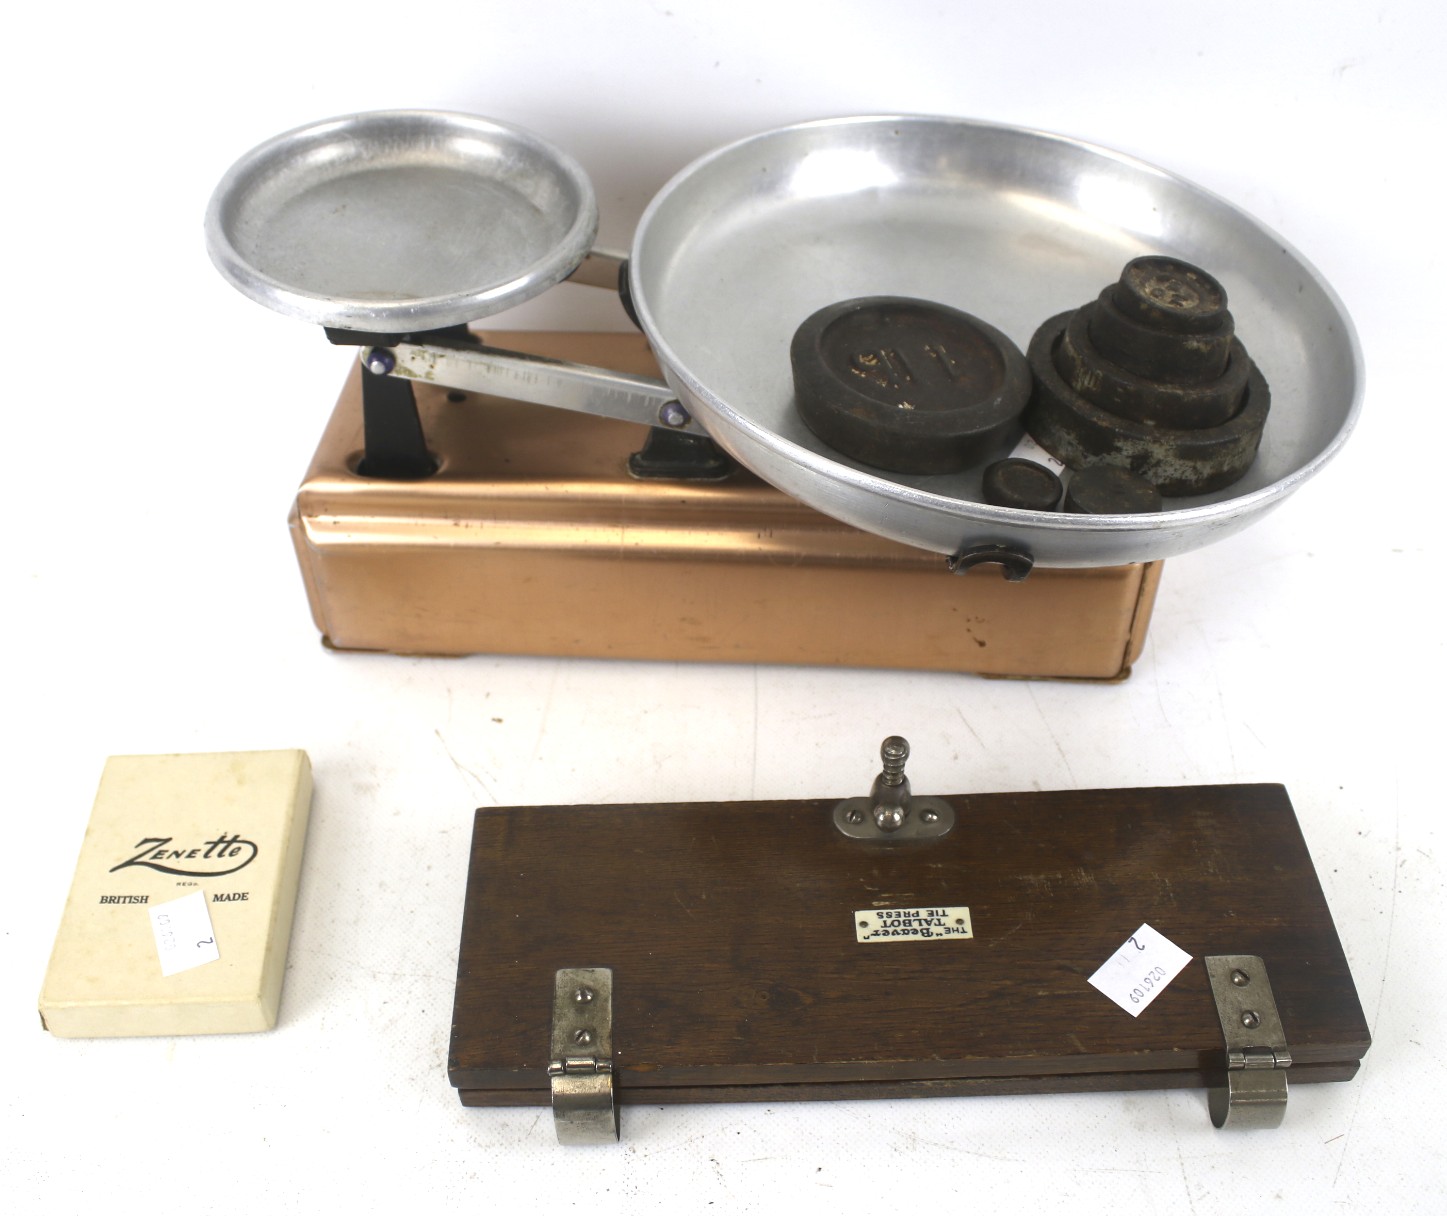 Set of vintage Lock's balance kitchen scales with weights and a tie press, etc. Max.